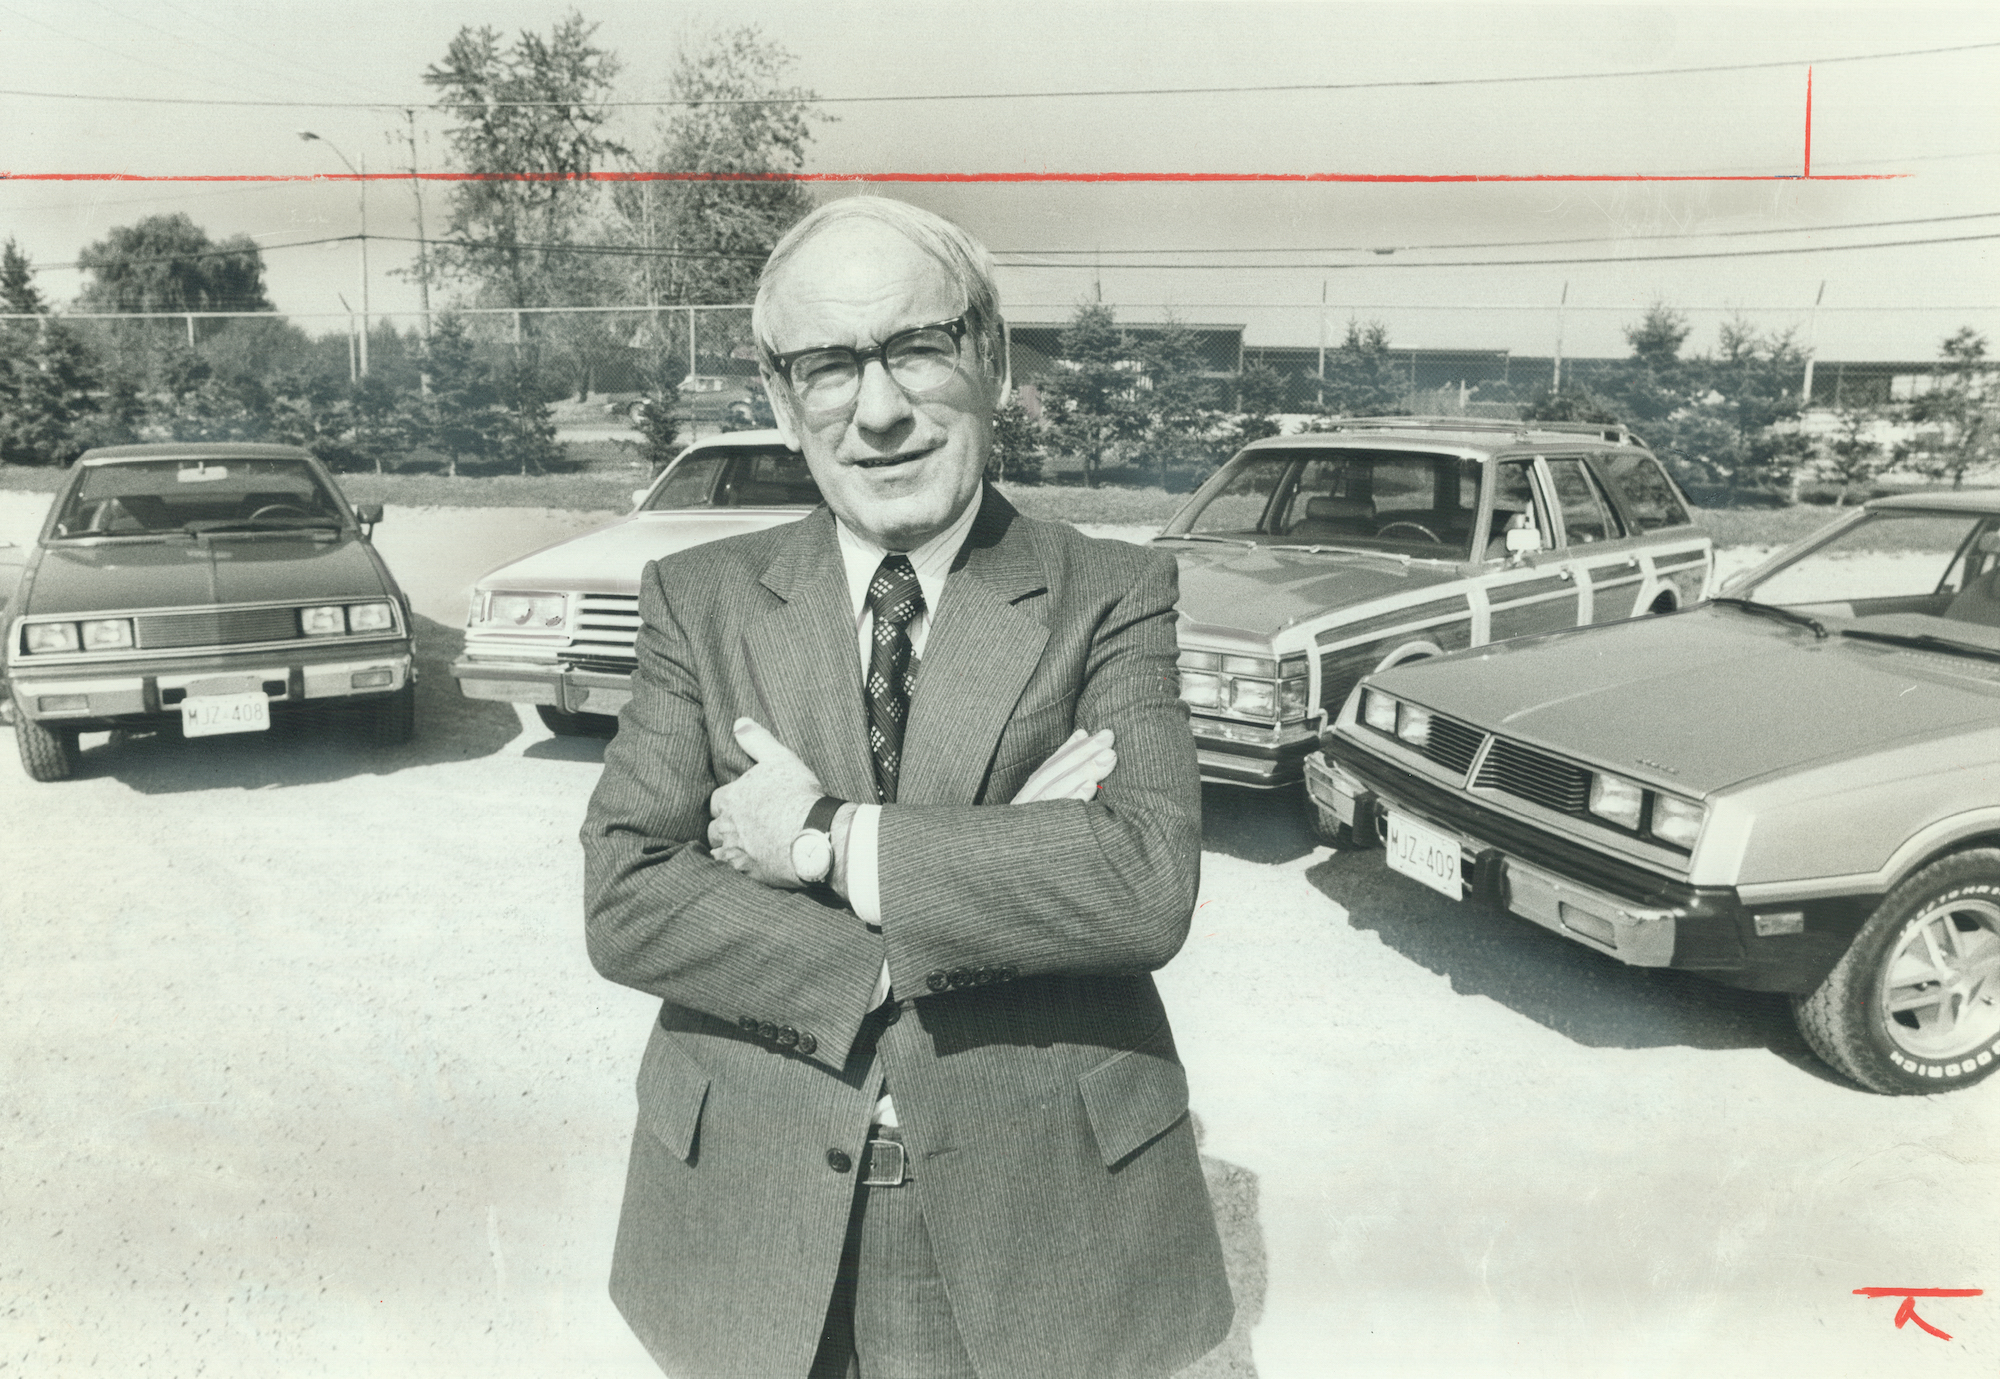 On September 8, 1977, C.O. Hurly, president of Chrysler Canada Ltd., stands in front of four 1978 models: the Plymouth Sapporo (left), Dodge Magnum XE, Chrysler Town & Country LeBaron, and Dodge Challenger, a subcompact